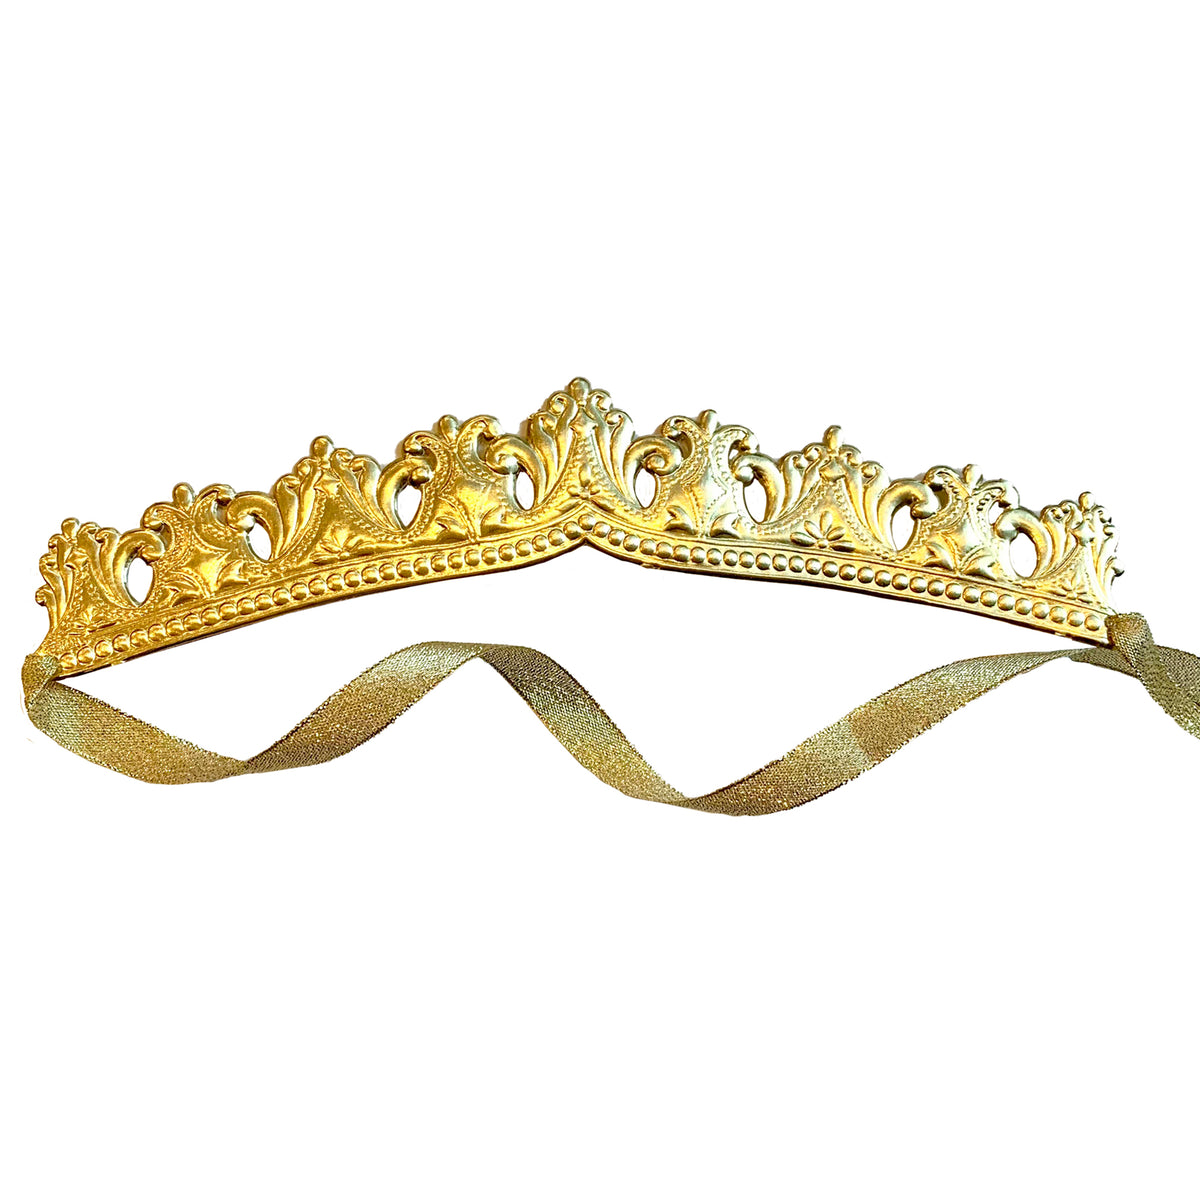 Crown Embossed Gold from Europe - with ribbon